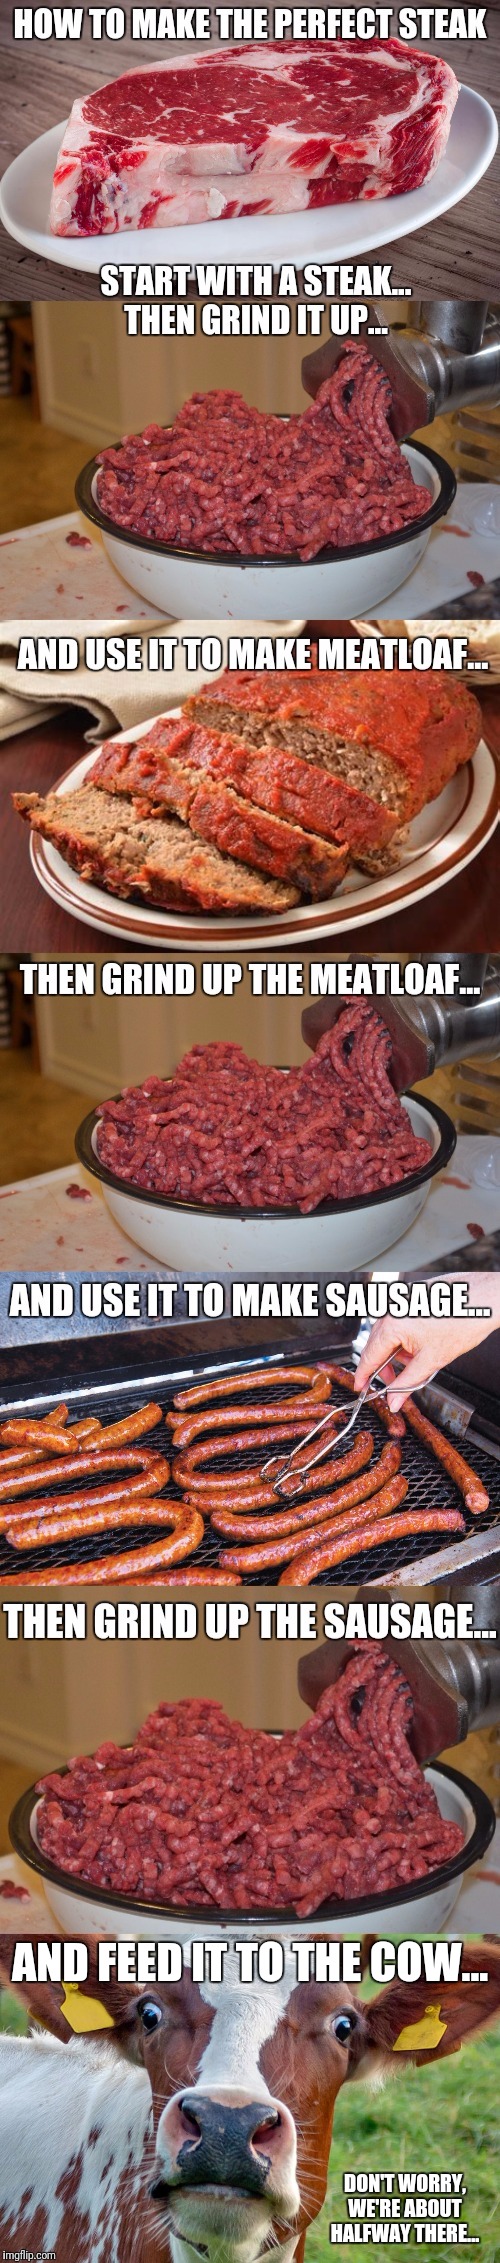 Perfect steak | AND FEED IT TO THE COW... DON'T WORRY, WE'RE ABOUT HALFWAY THERE... | image tagged in meat,meatloaf,sausage,cows,steak | made w/ Imgflip meme maker